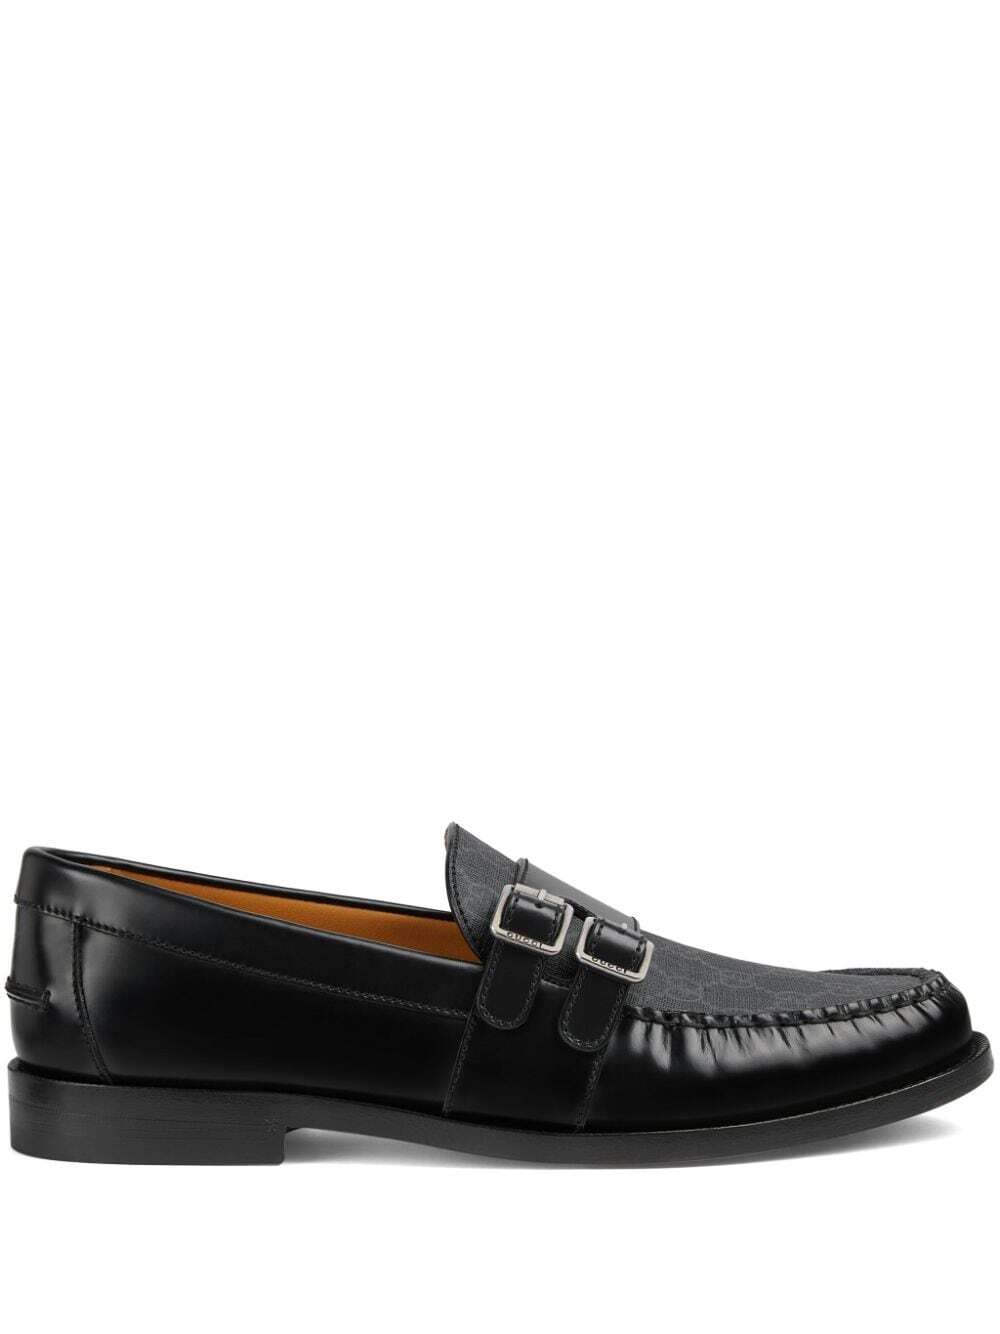 GG leather loafer with buckle